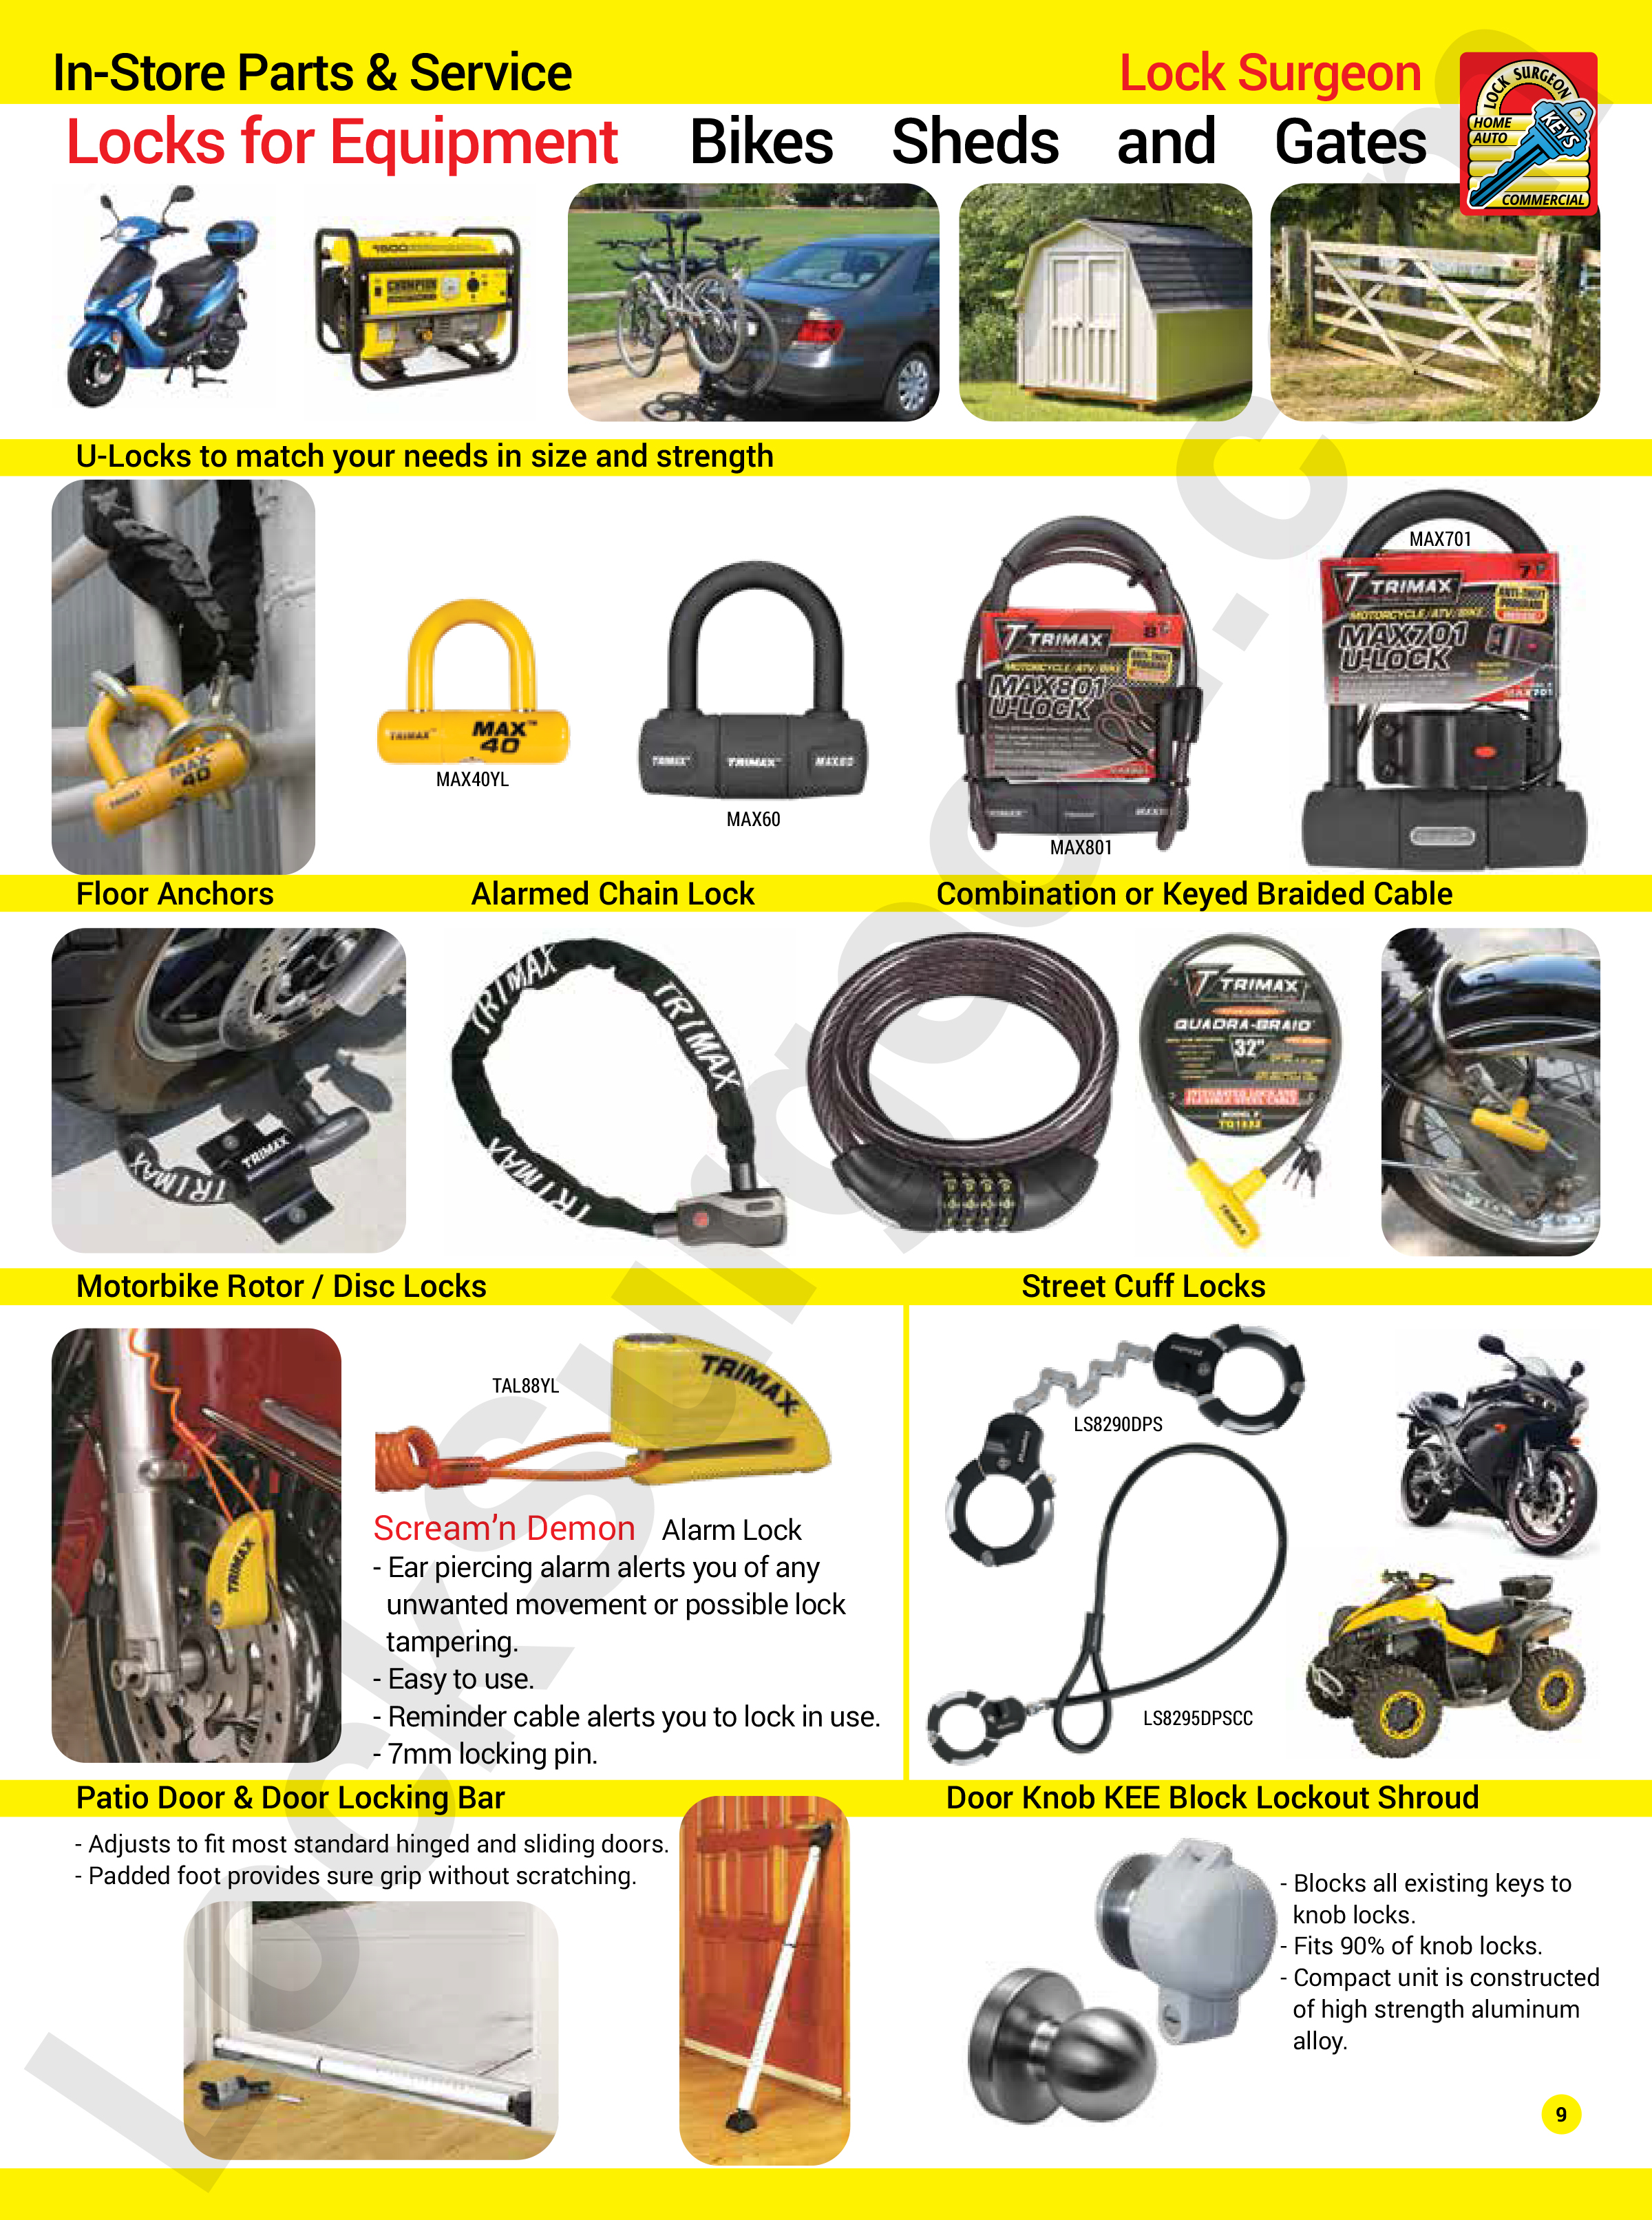 Locks for equipment like bikes, sheds and gates. In-store parts and service. U-Locks to match your needs in size and strength. Floor anchors, alarmed chain lock, combination or keyed braided cable, motorbike rotor or disc locks, street cuff locks, patio door and door locking bar, door knob Kee-Block lockout shroud. Screamin Demon alarm locks for bikes.